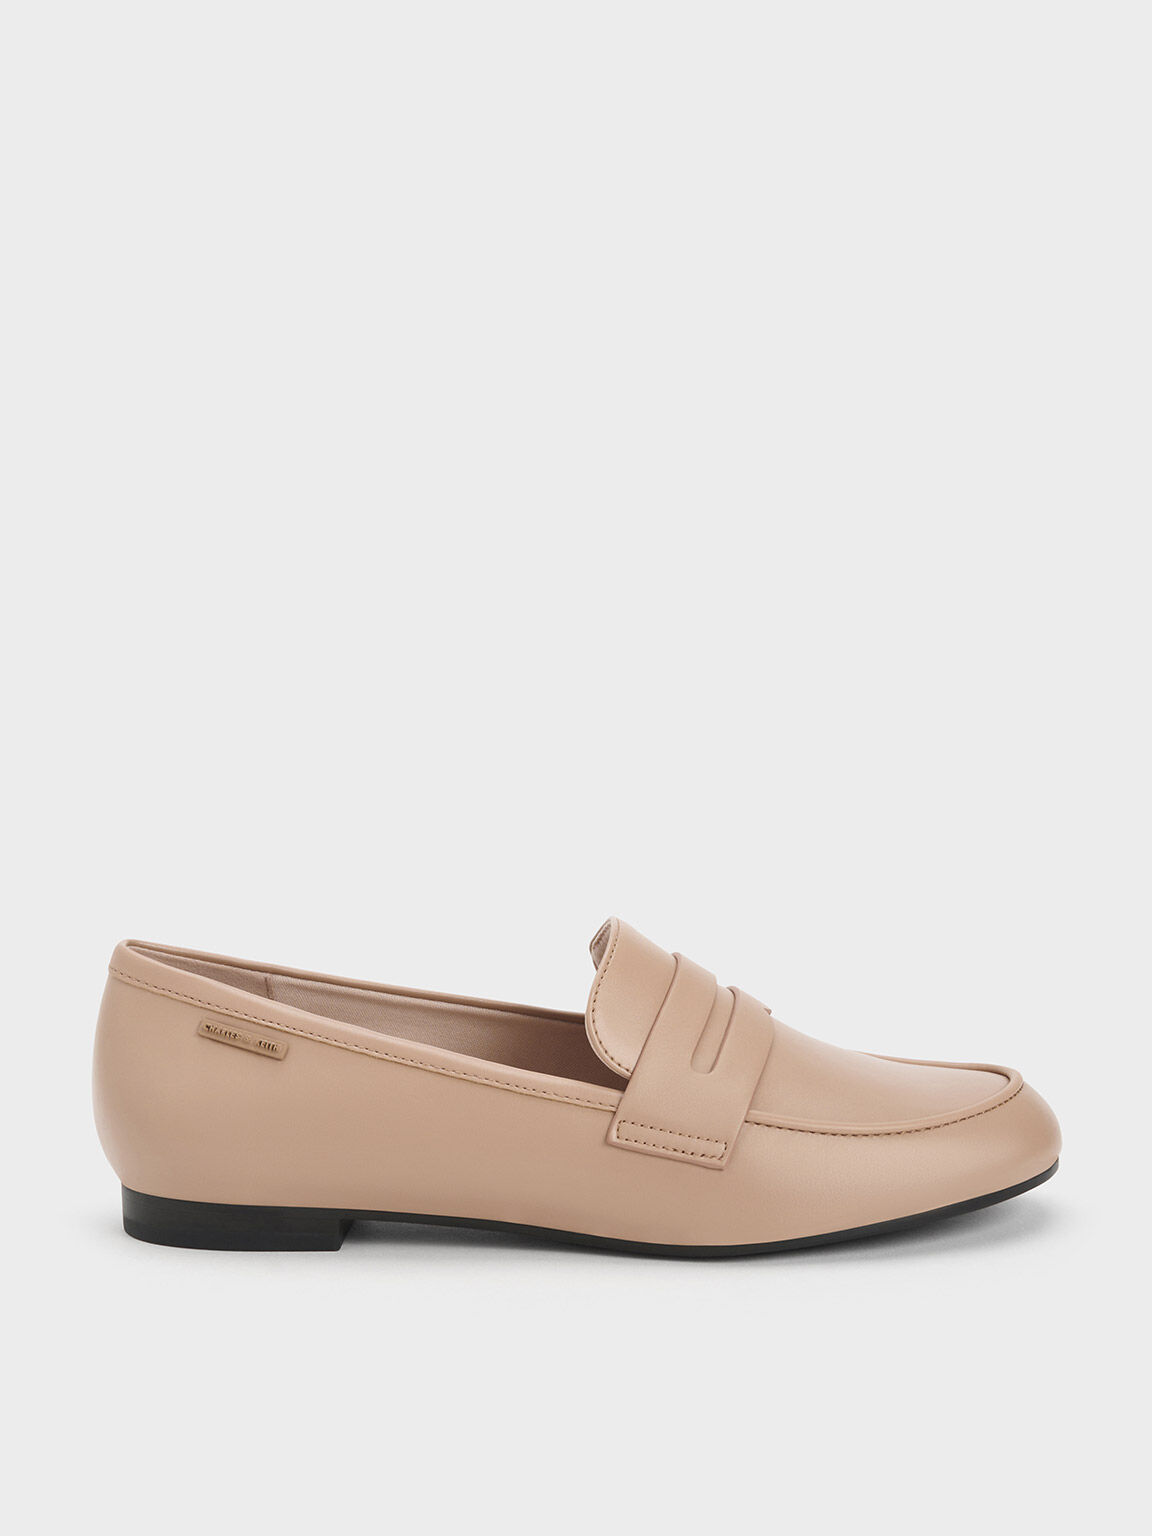 Rang Officer hav det sjovt Women's Loafers | Shop Exclusive Styles | CHARLES & KEITH HK